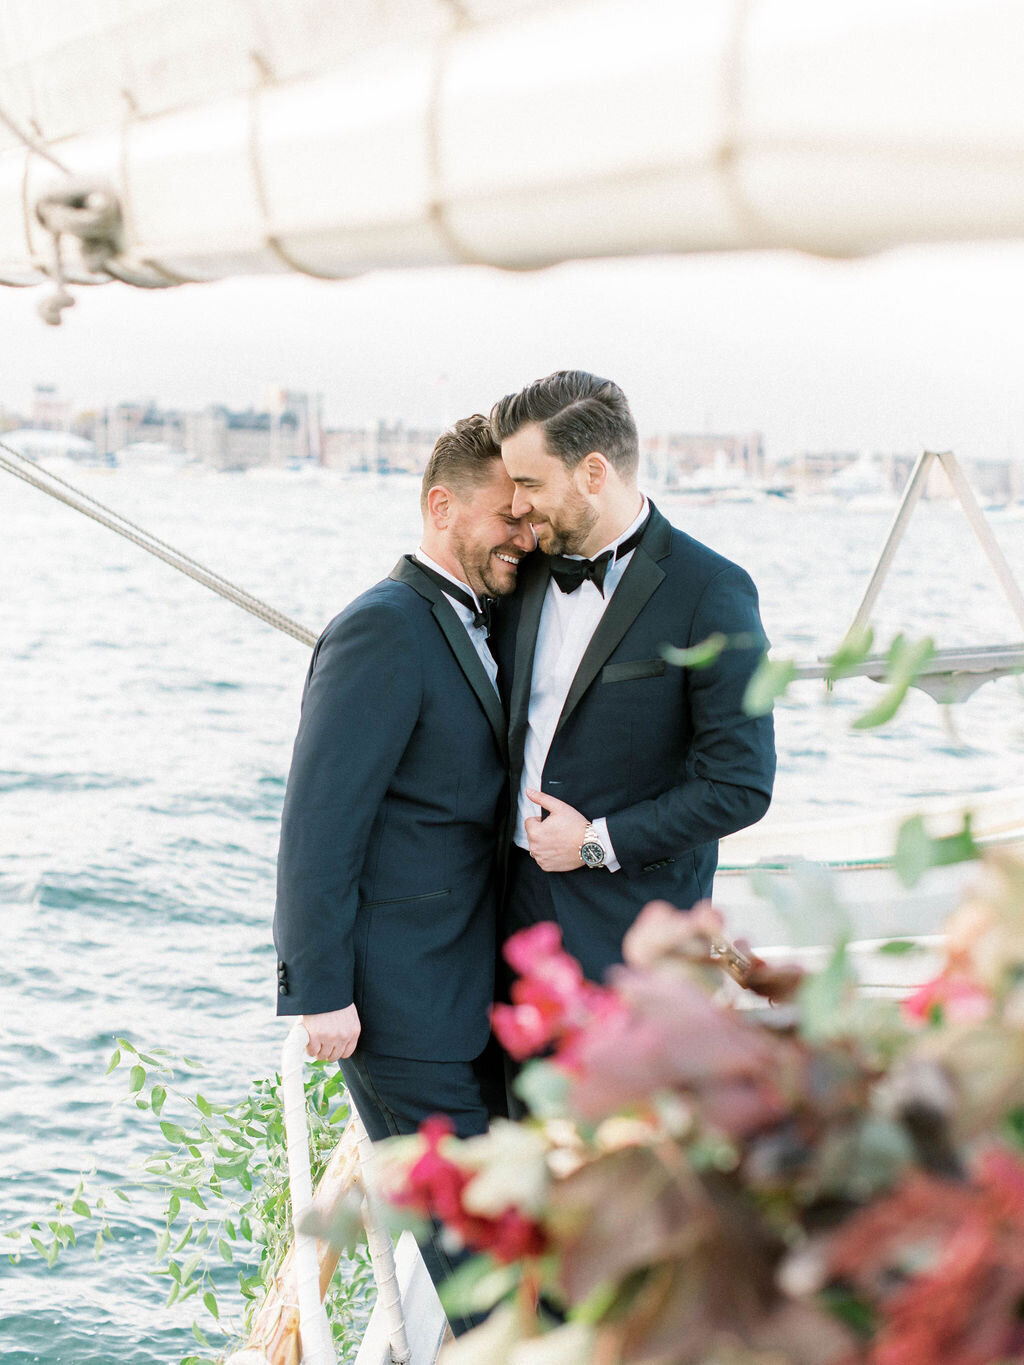 Kate-Murtaugh-Events-Boston-Harbor-sail-boat-yacht-elopement-wedding-planner-moody-florals-grooms-wed